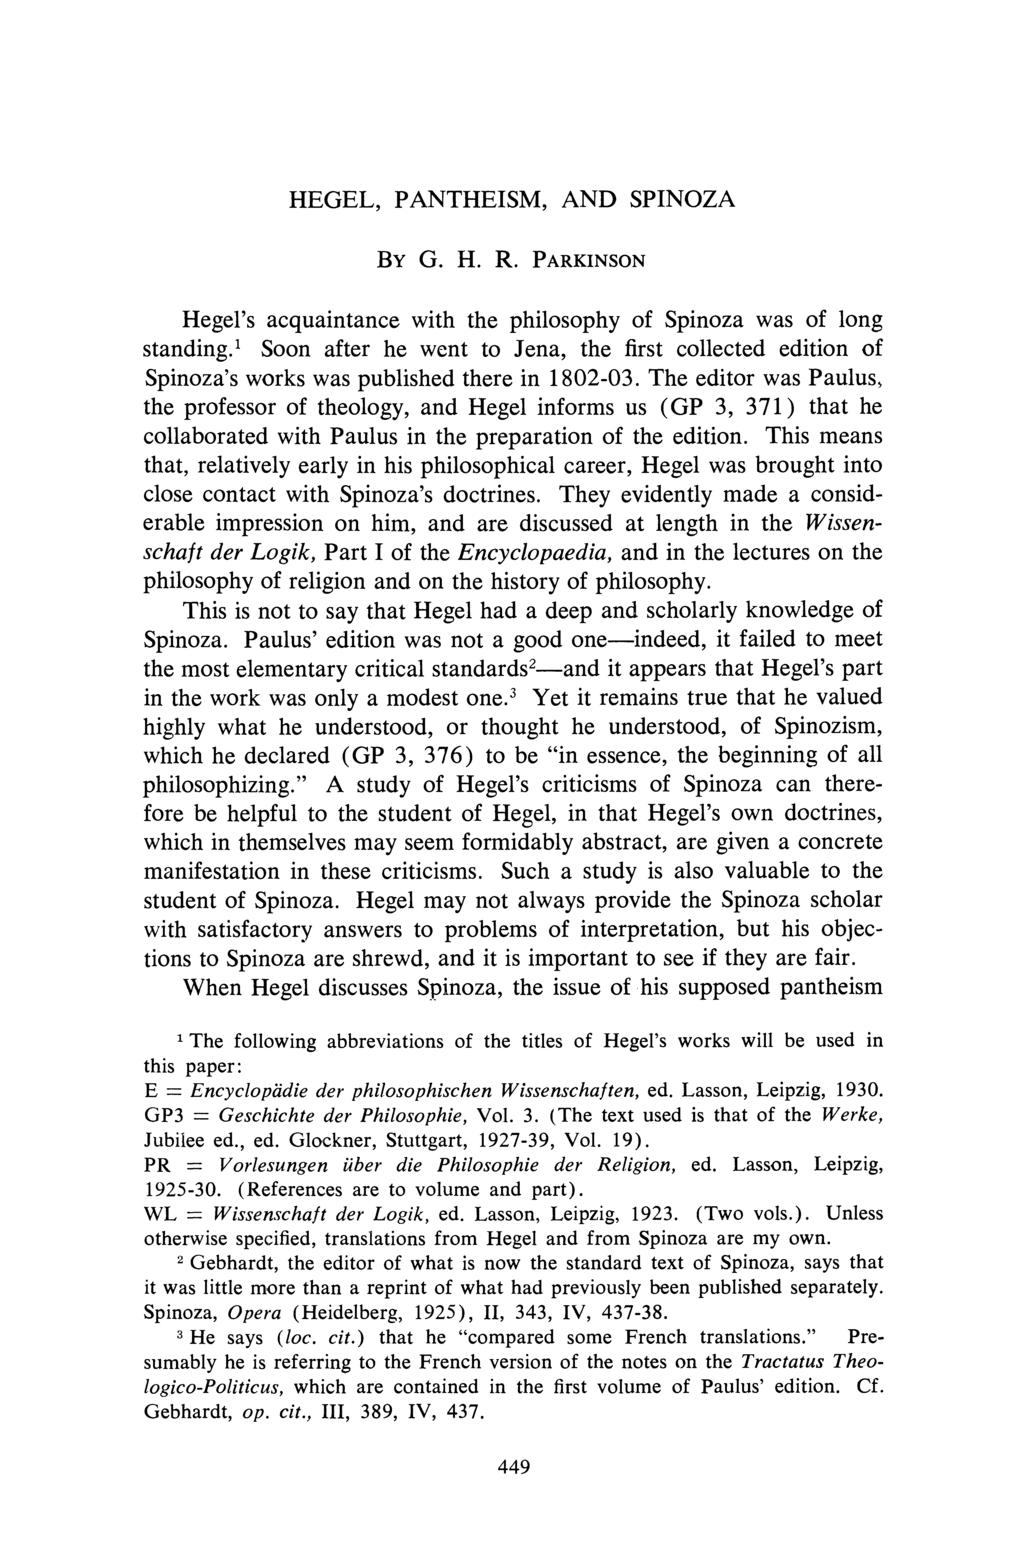 HEGEL, PANTHEISM, AND SPINOZA Hegel's acquaintance with the philosophy of Spinoza was of long standing.